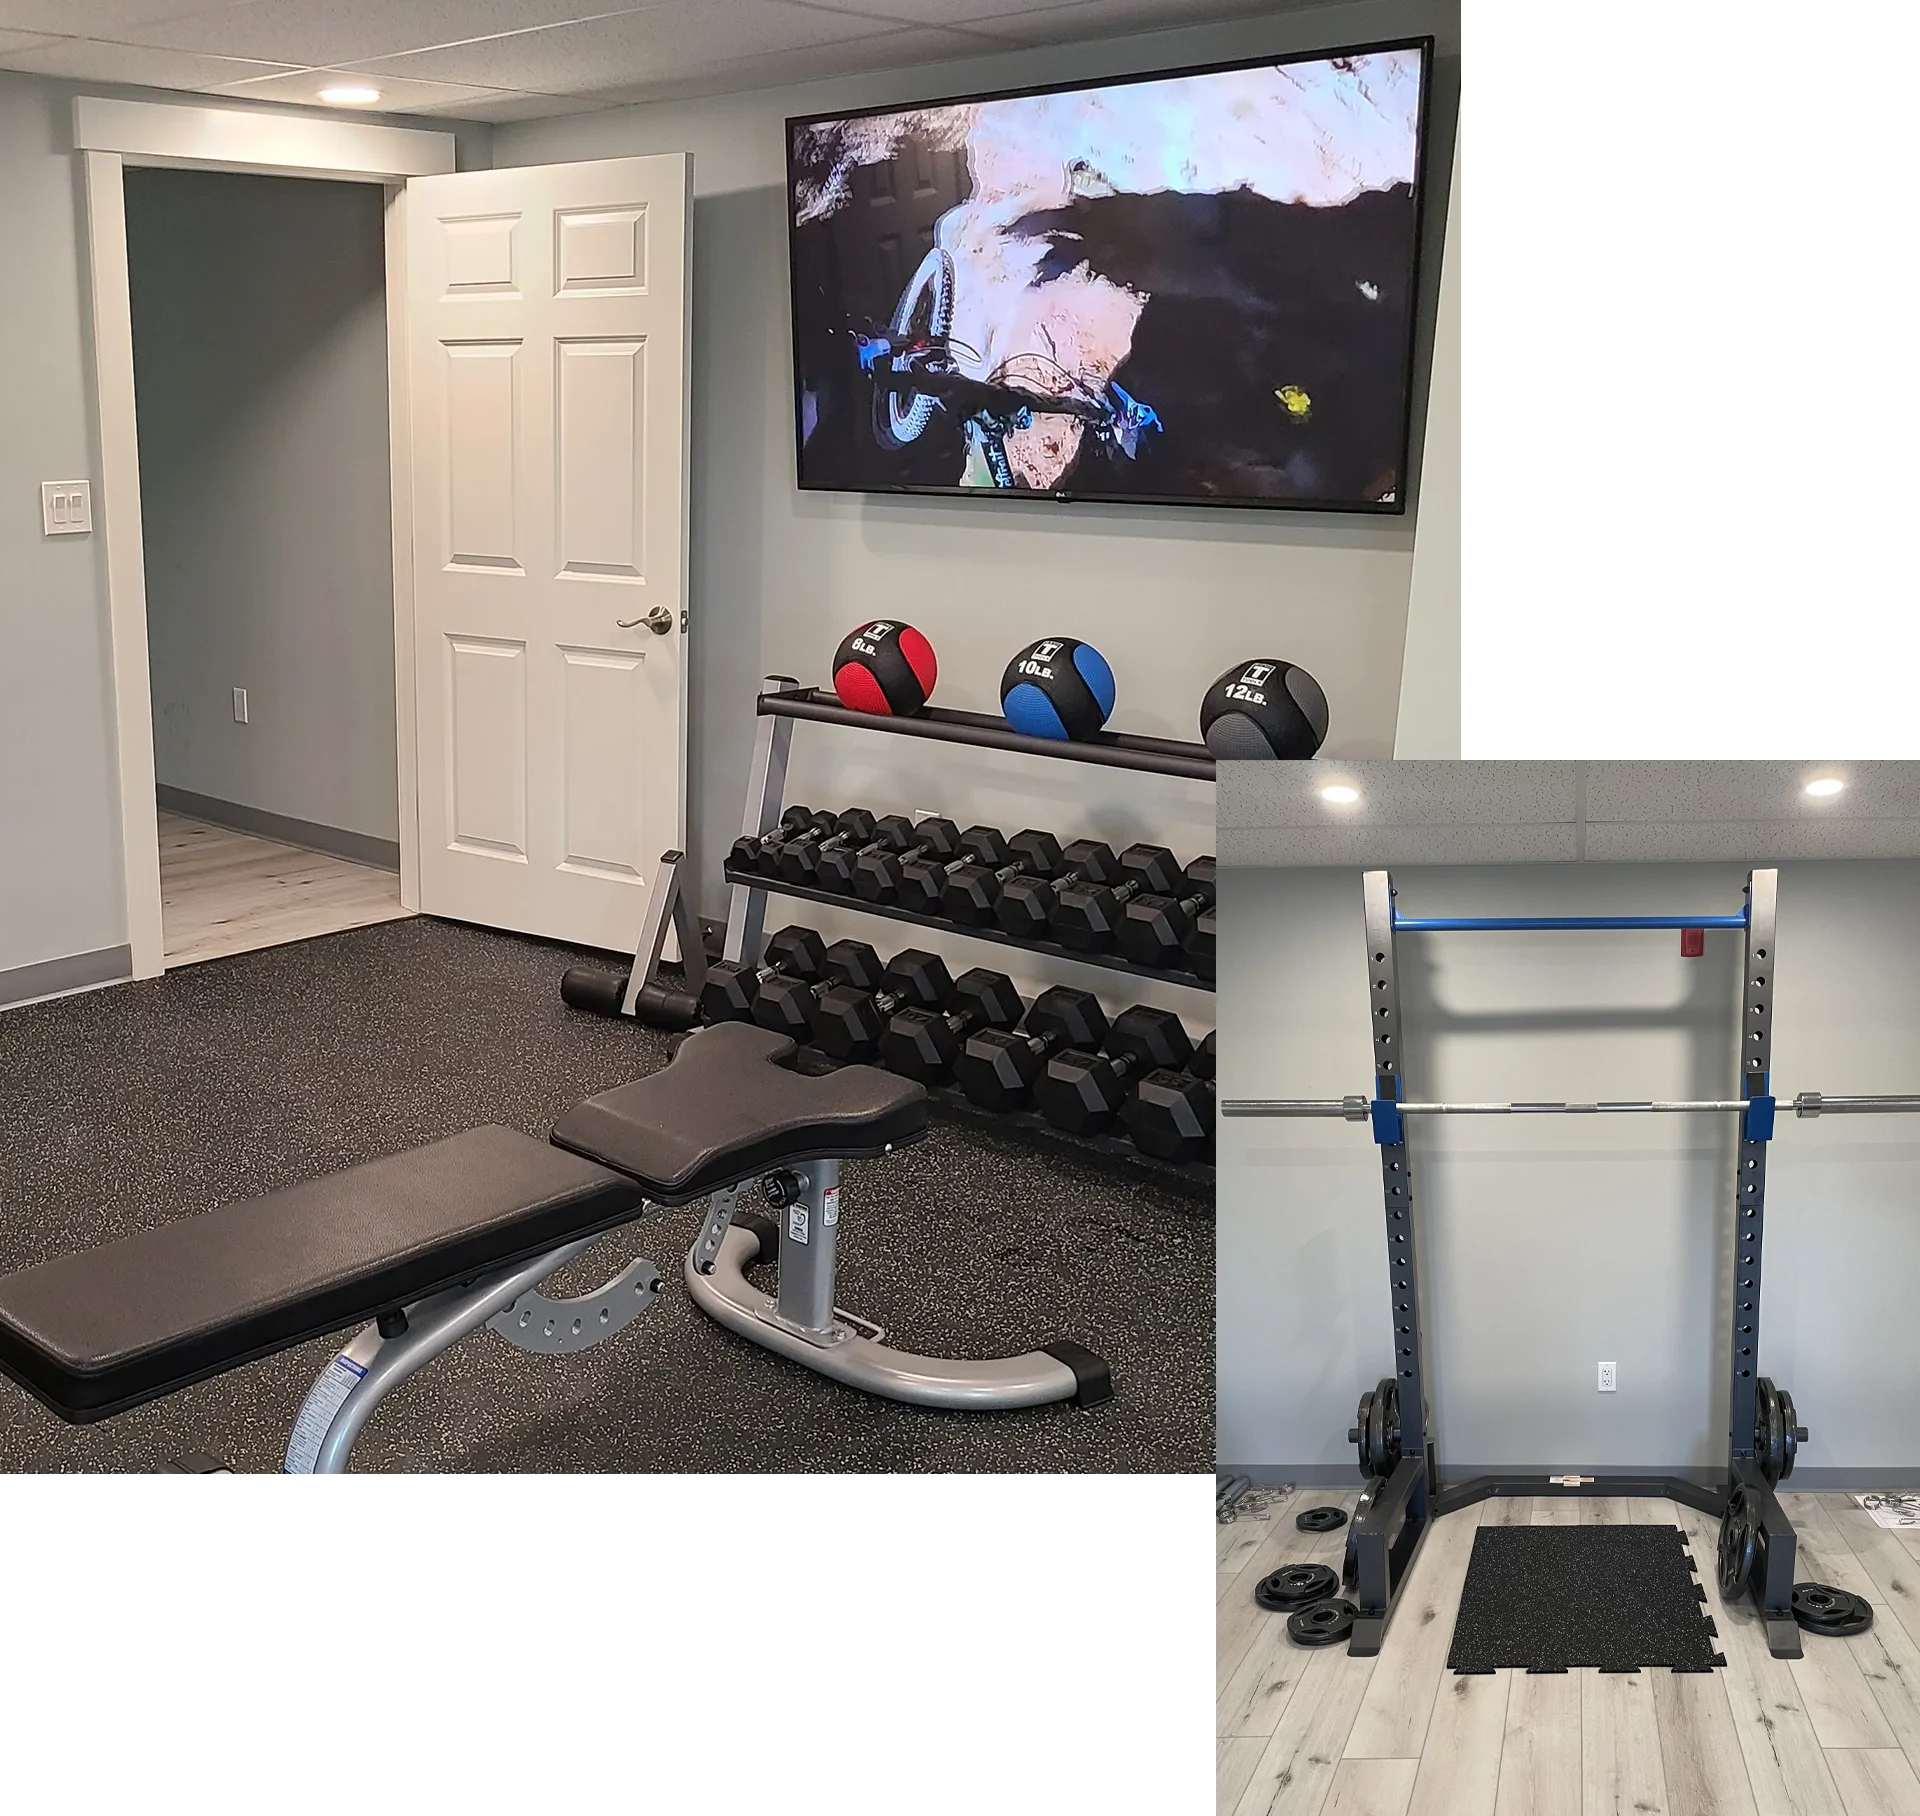 An image of the fitness center equipment at Lovering Meredith